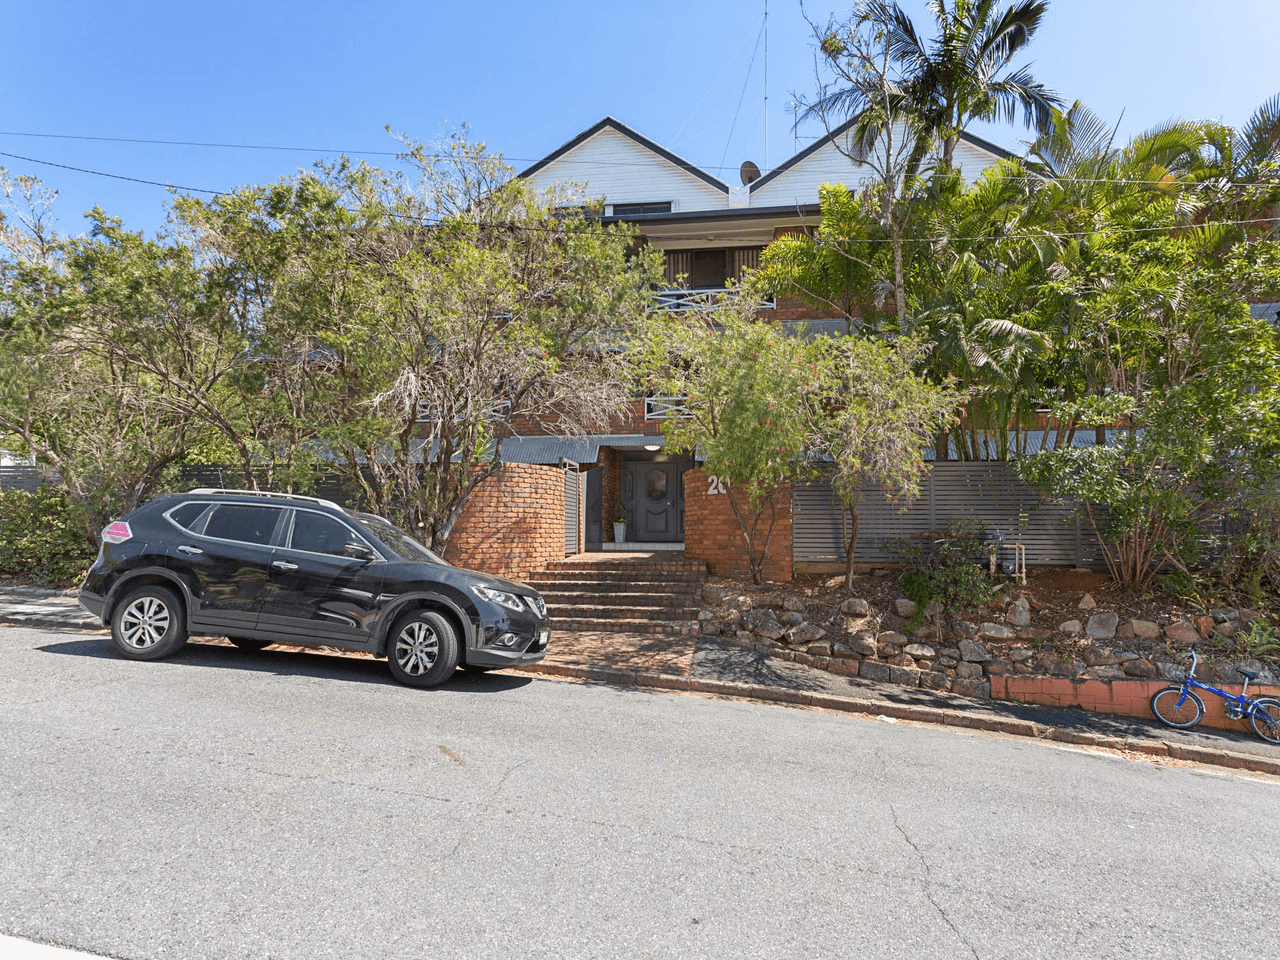 33/20 MCCONNELL Street, SPRING HILL, QLD 4000